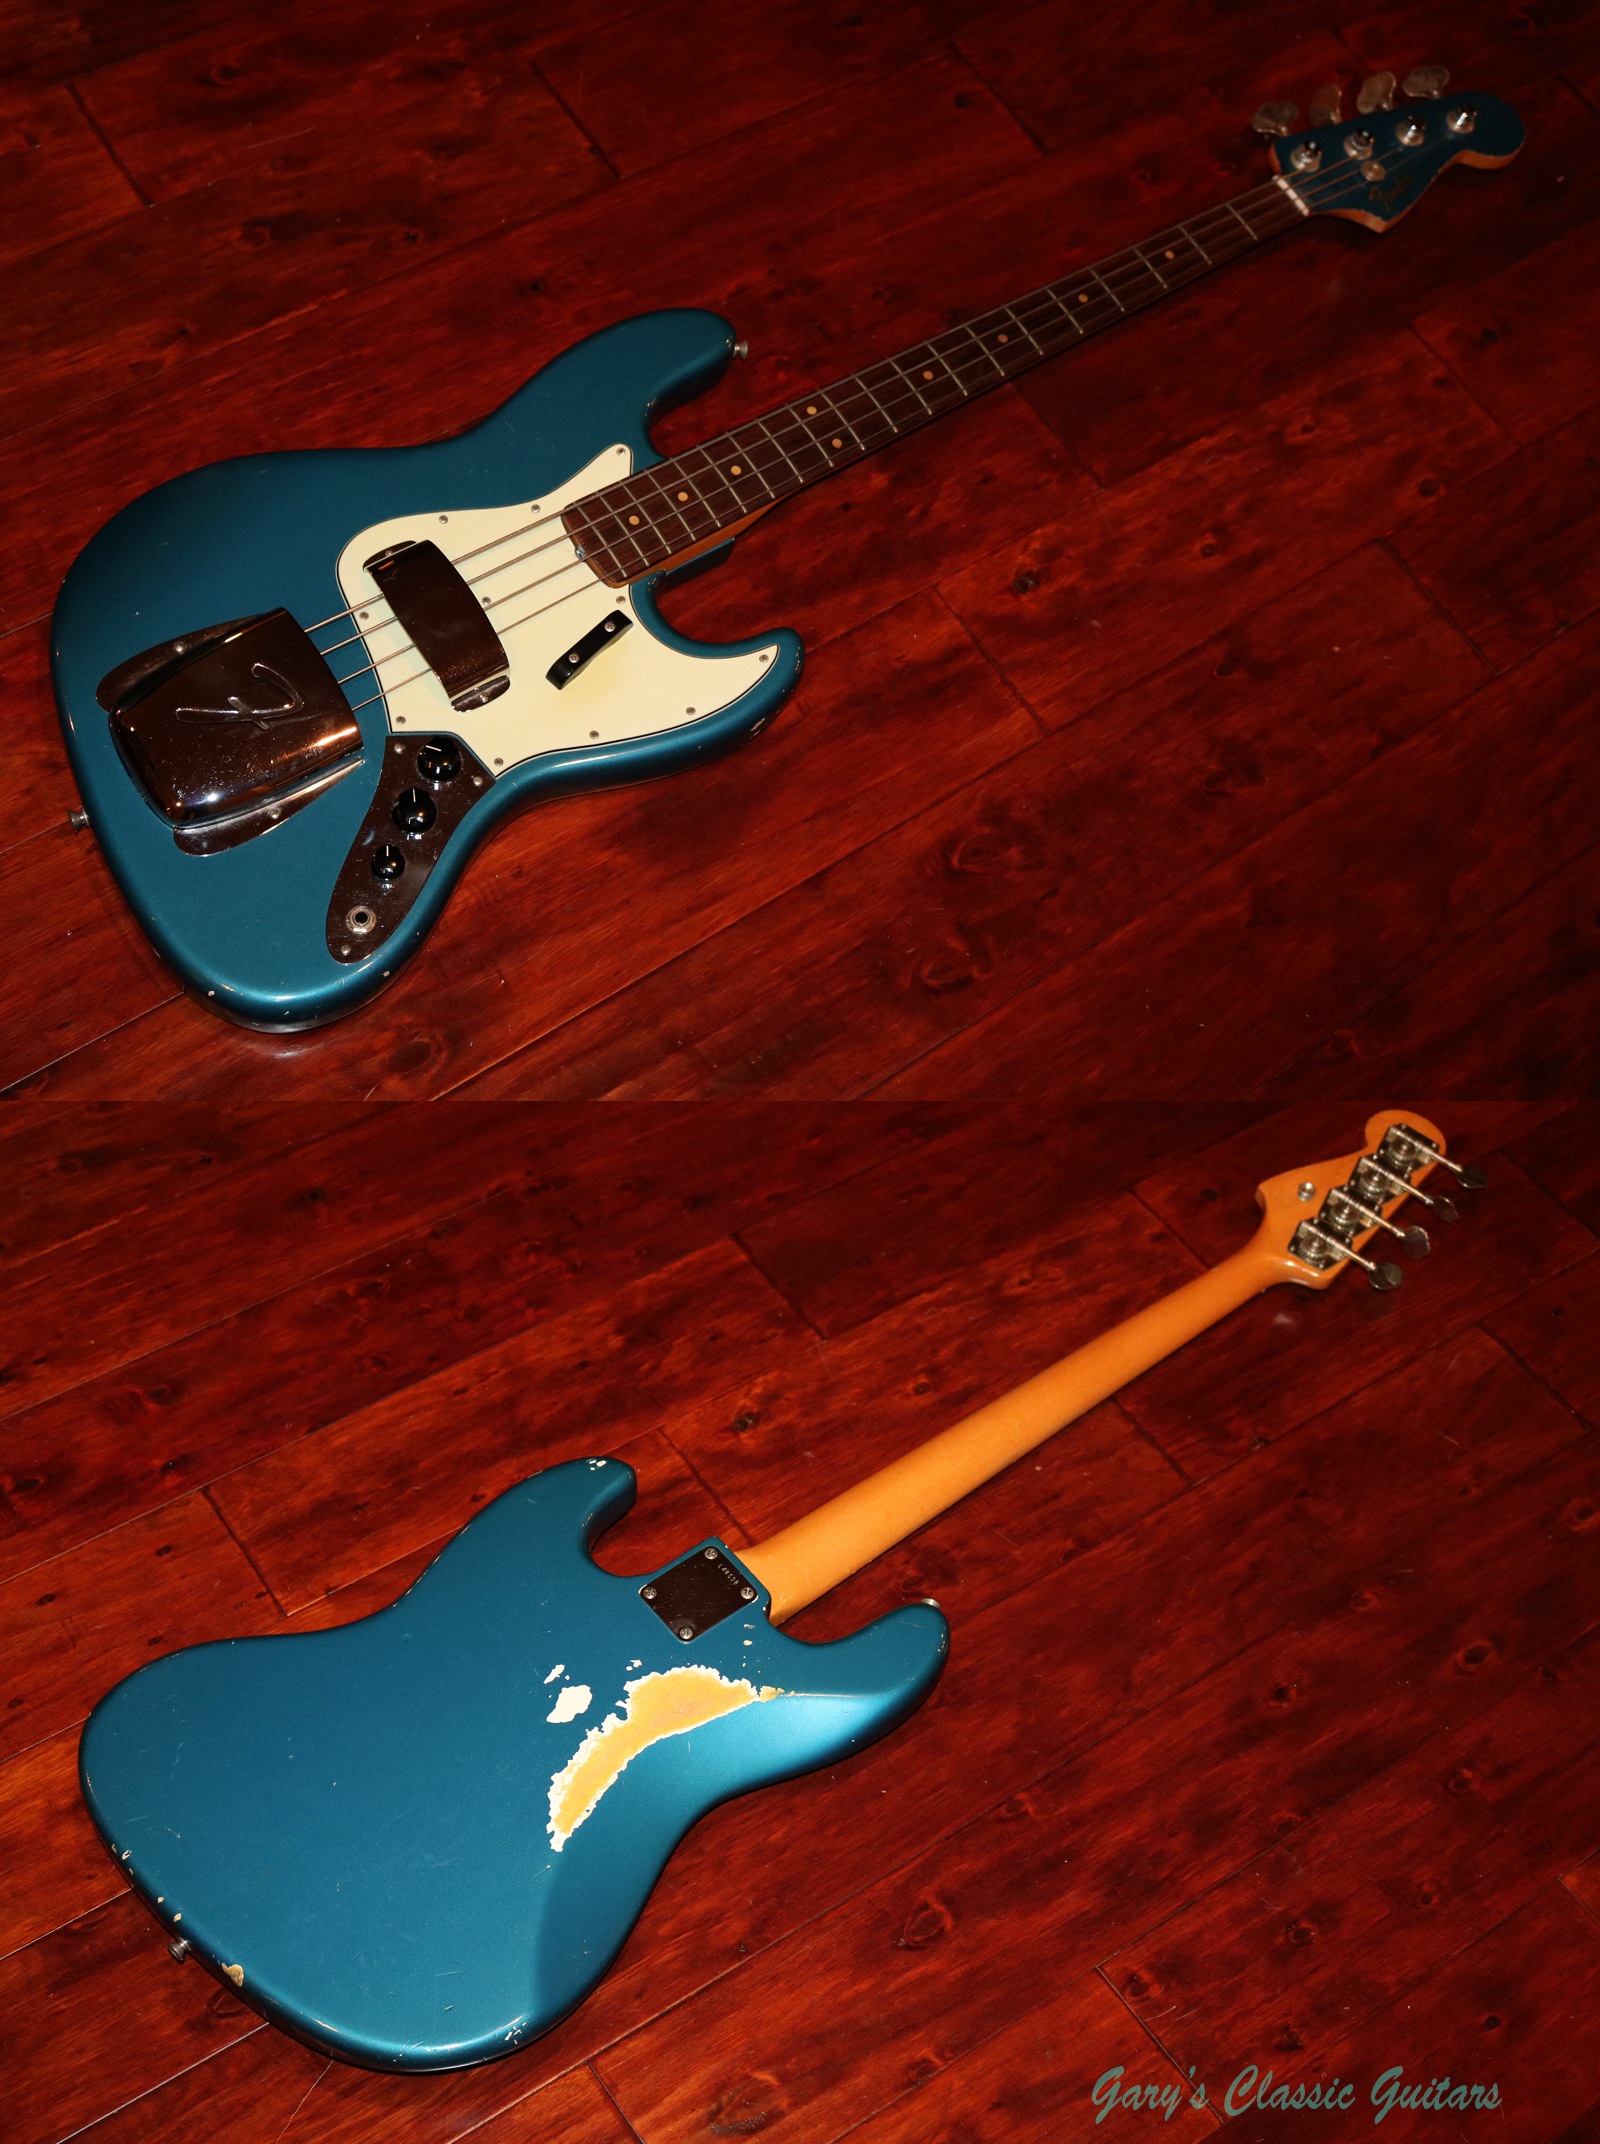 1964 Fender Jazz Bass, Lake Placid Blue with matching headstock 